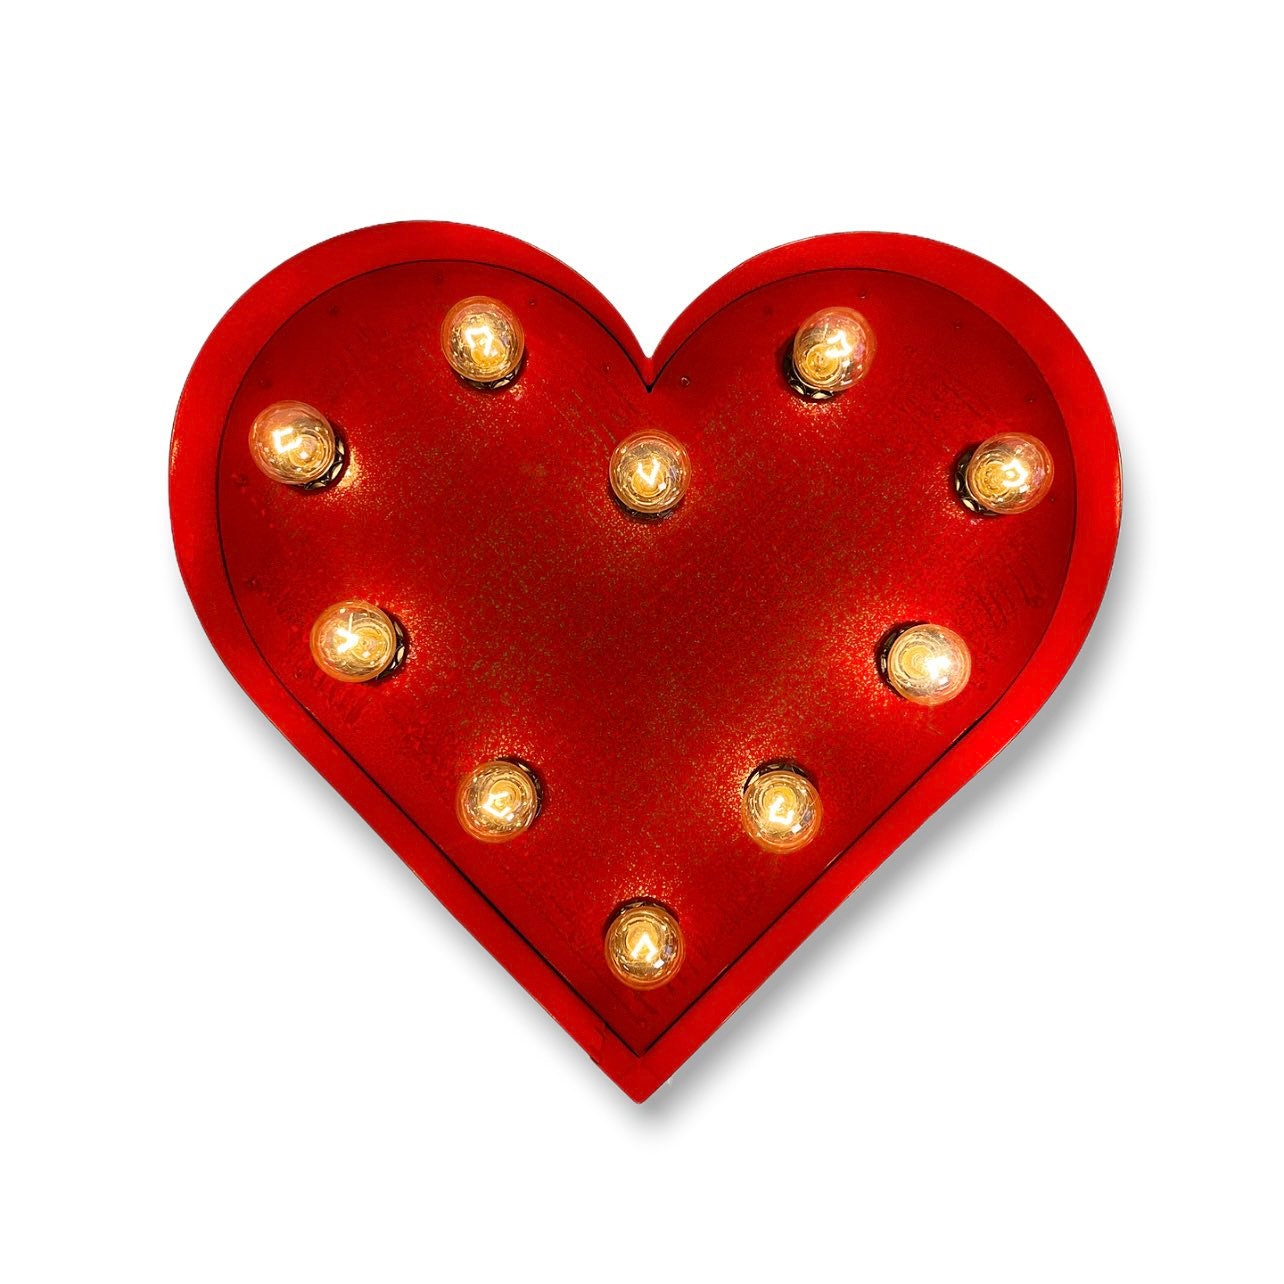 Unique Gold I Love You Heart Led Light Table Lamp Gift UK Made Valentines Day 